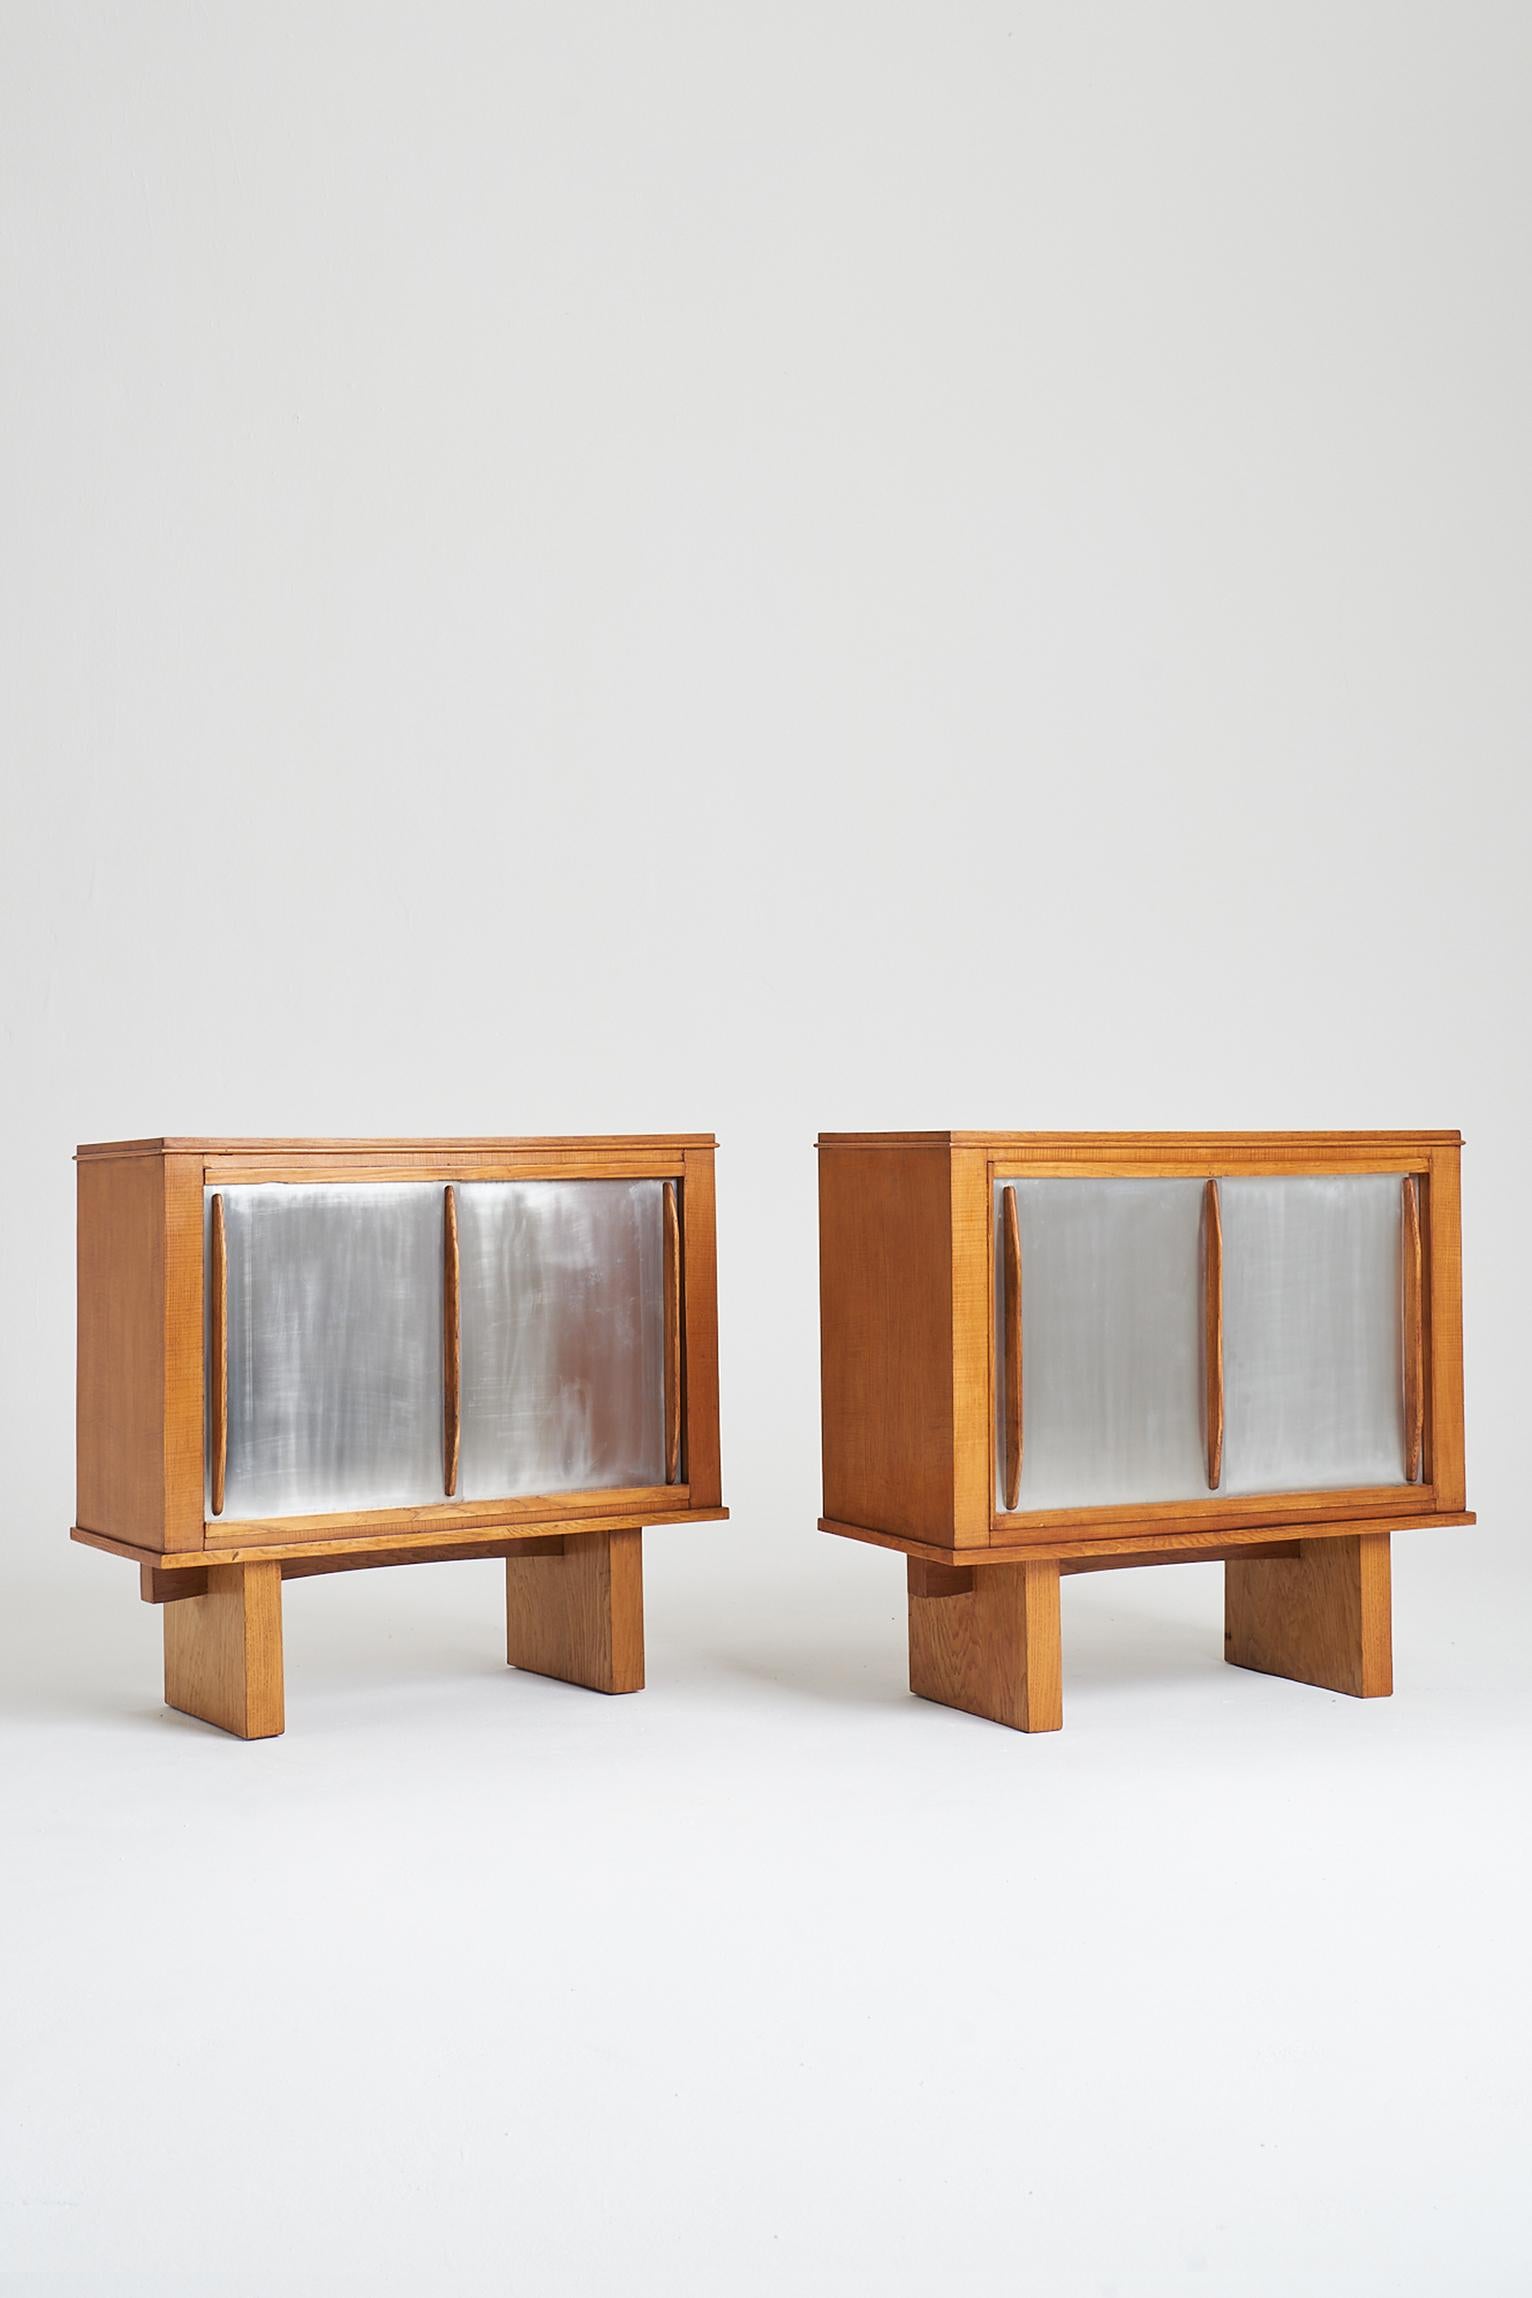 Veneer Pair of Oak and Aluminium Cabinets, in the Manner of Charlotte Perriand